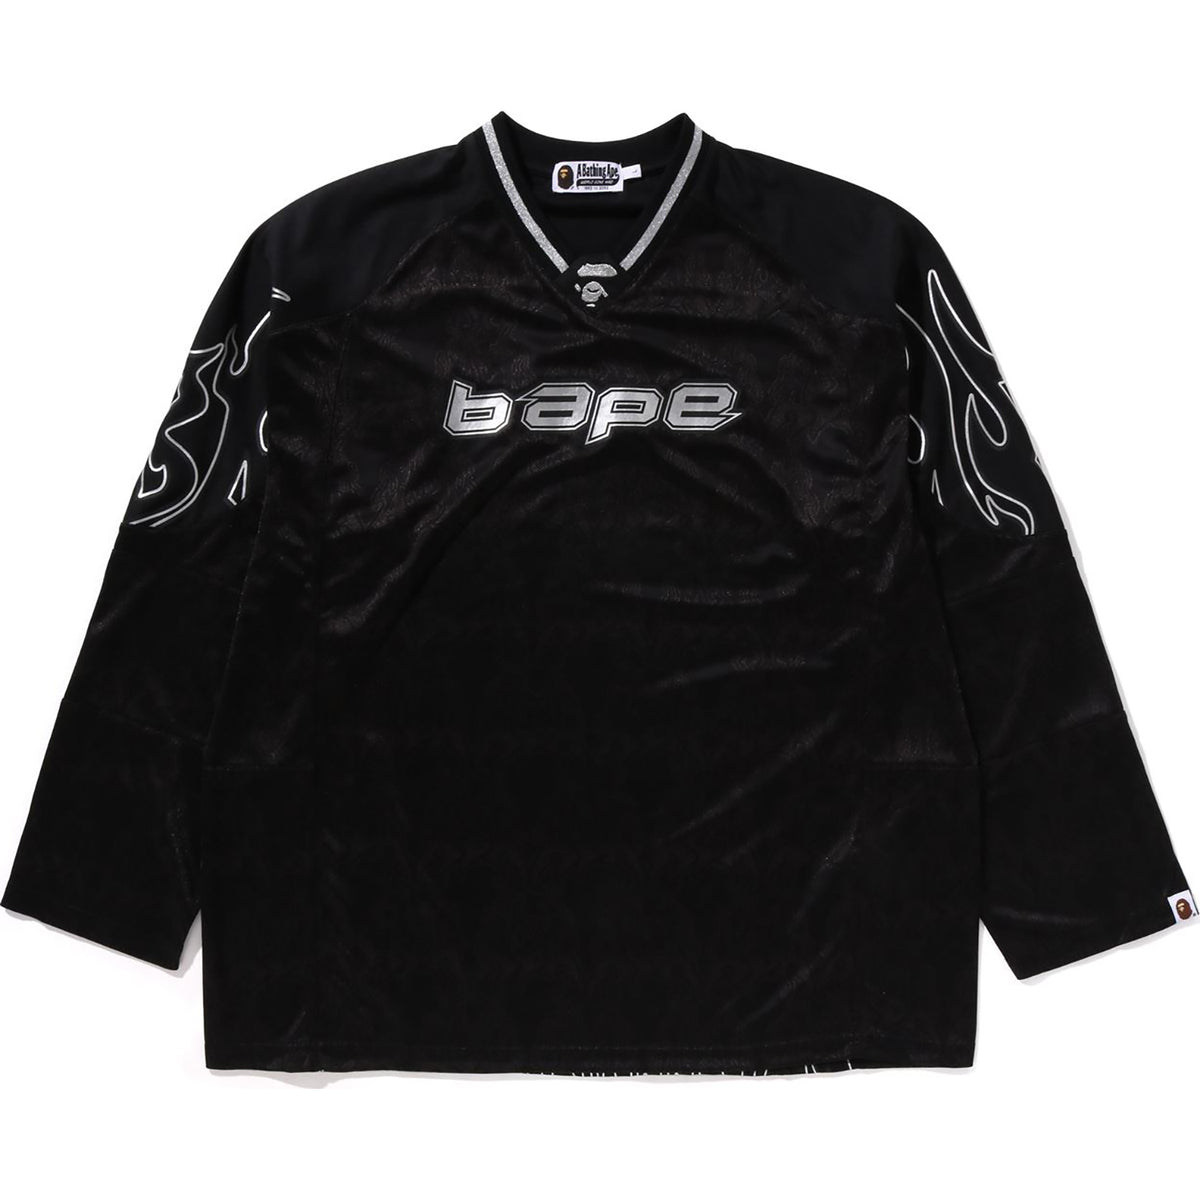 FLAME FOOTBALL JERSEY MENS